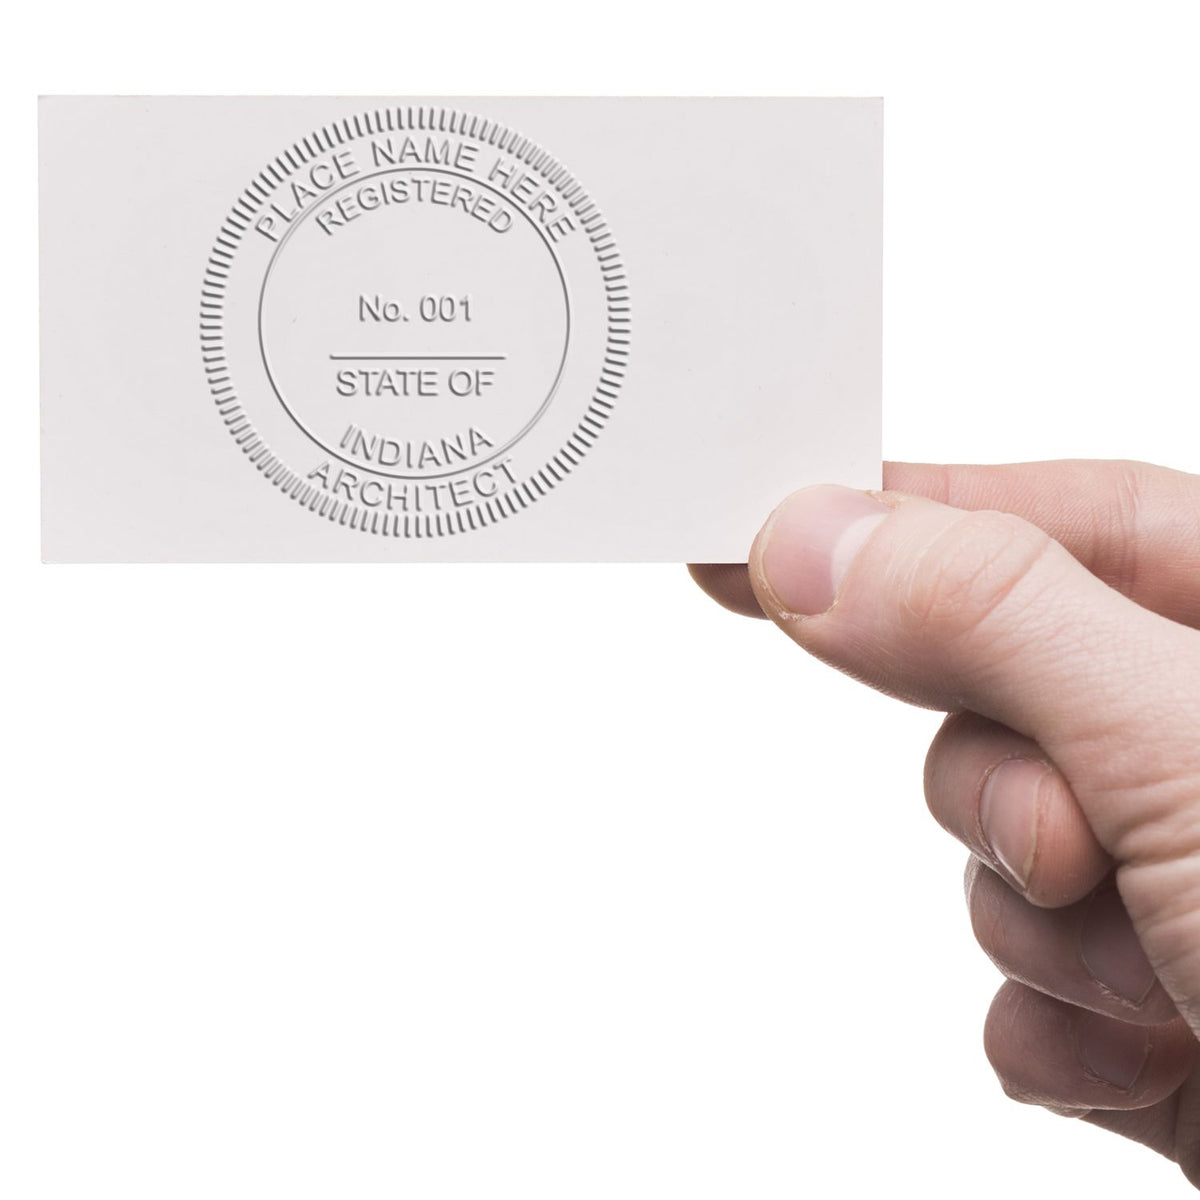 An alternative view of the Hybrid Indiana Architect Seal stamped on a sheet of paper showing the image in use